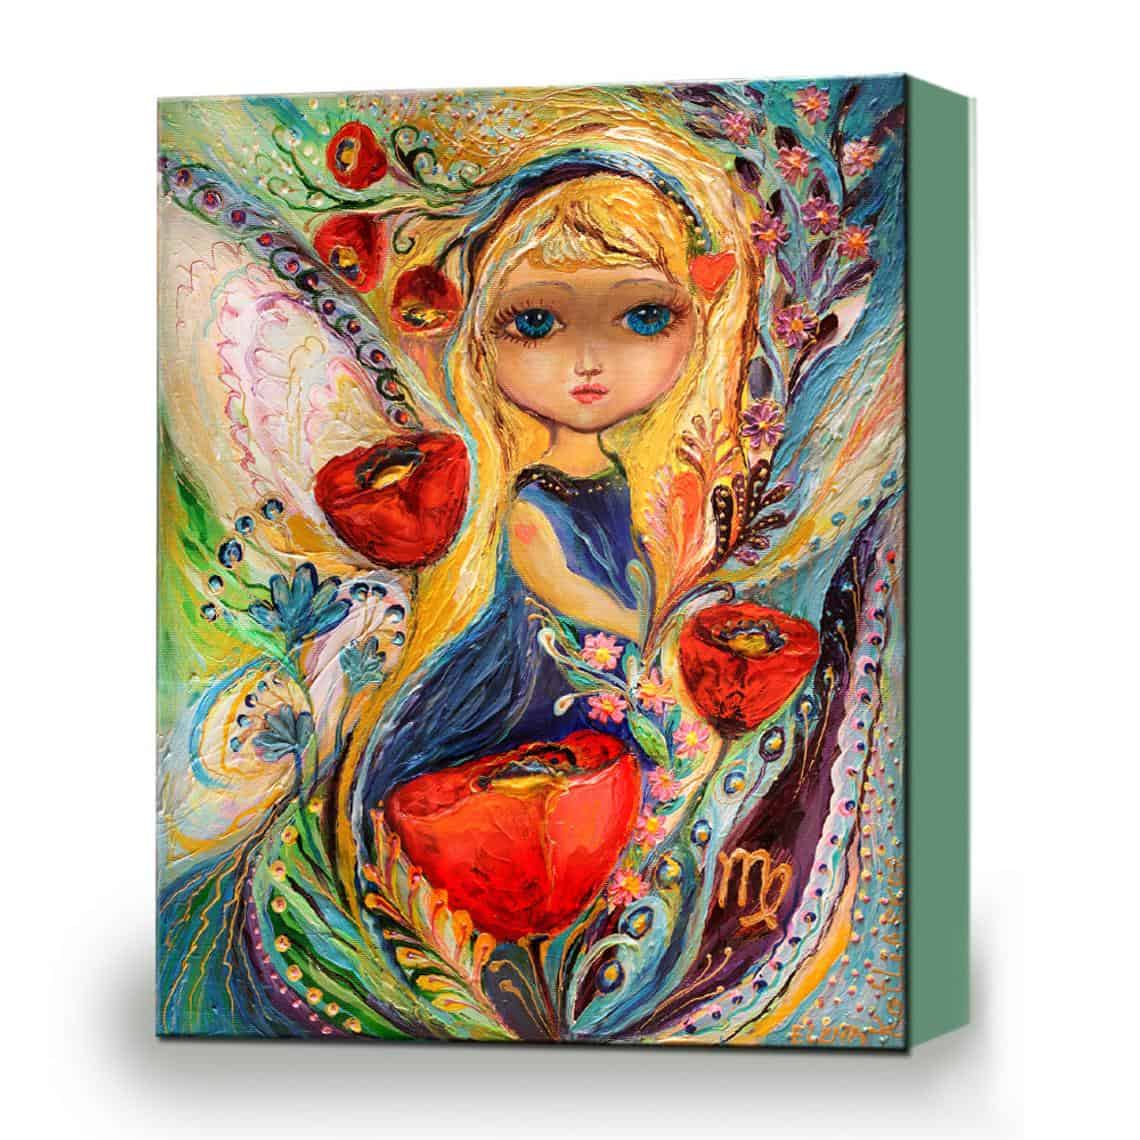 Details about   Fairies of Zodiac high quality ready to hang art deco canvas print Gemini 